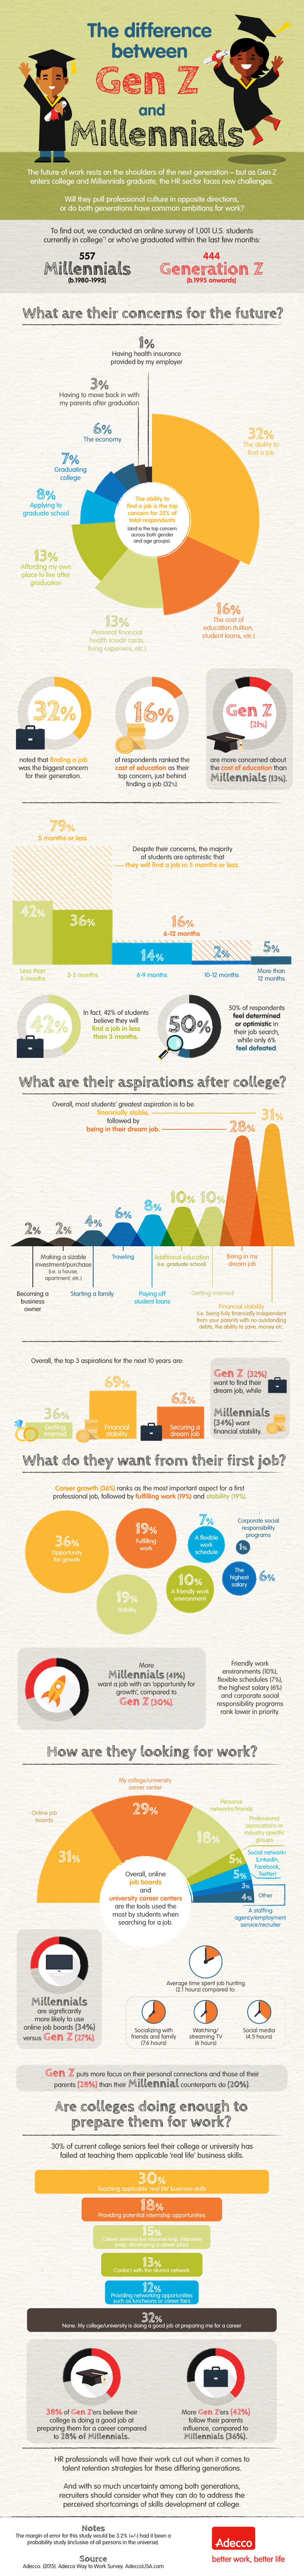 Difference Between Millennials and Generation Z Infographic